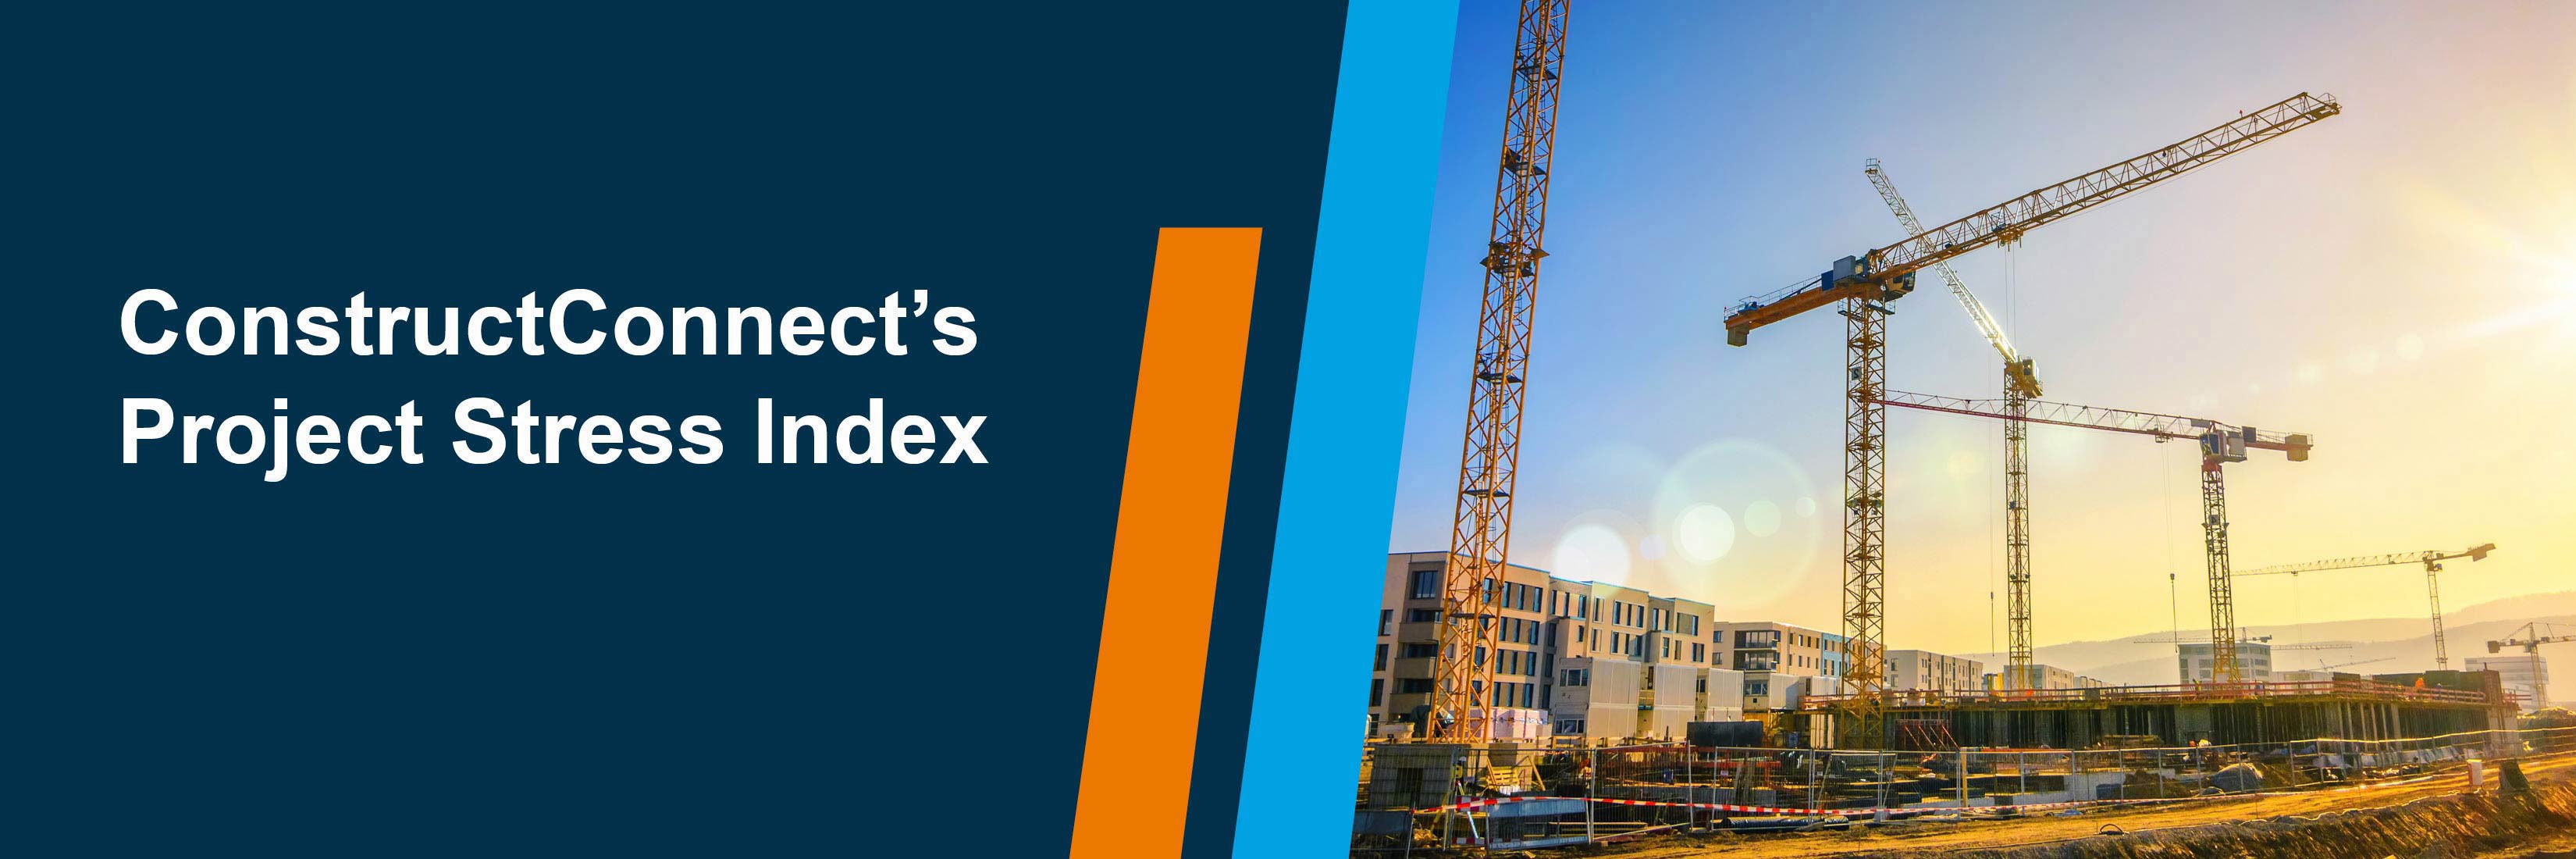 ConstructConnect's Project Stress Index - March 11